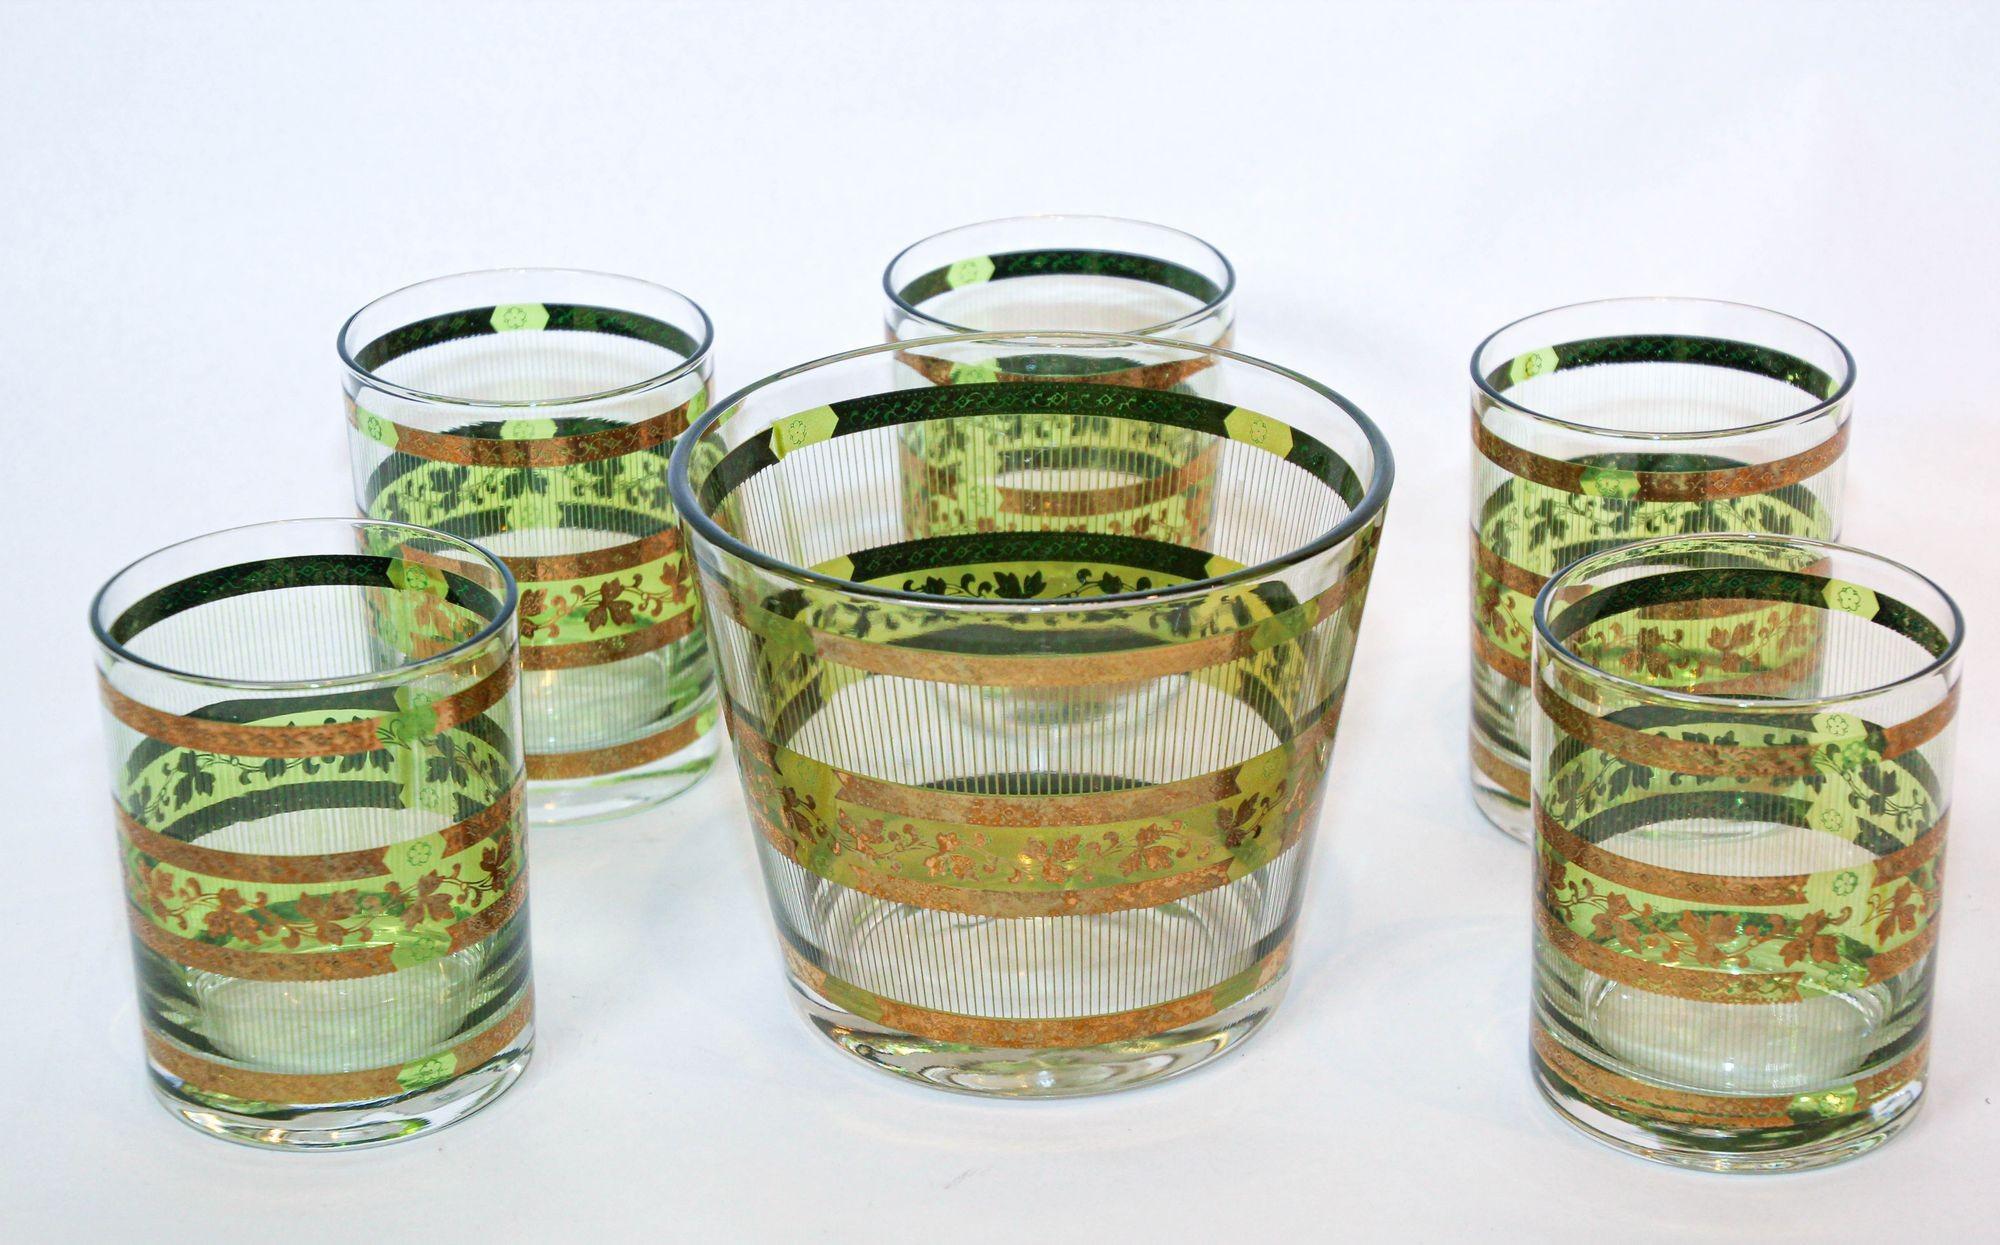 https://a.1stdibscdn.com/vintage-culver-barware-cocktail-set-green-and-gold-rock-glasses-and-ice-bucket-for-sale/f_9068/1680727070318/0_Vintage_green_and_gold_Culver_George_Briard_Mid_Century_Modern_Barware_Ice_bucket_and_cocktail_glasses_3_master.jpeg